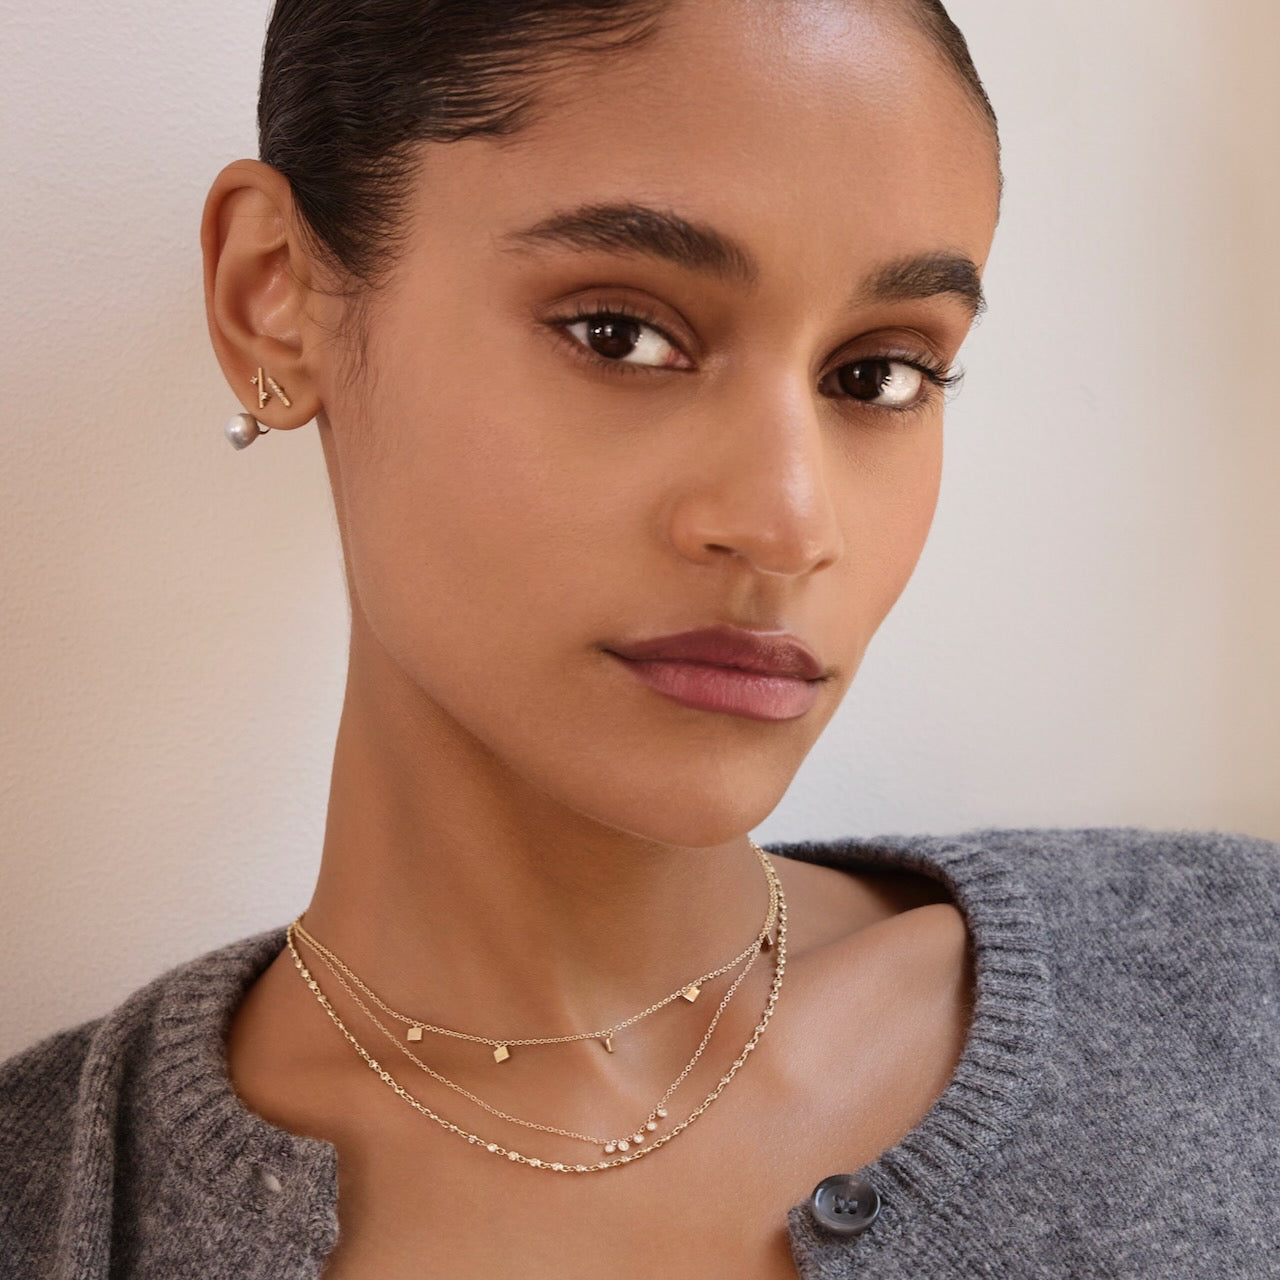 Jewelry 101: How to Layer Necklaces